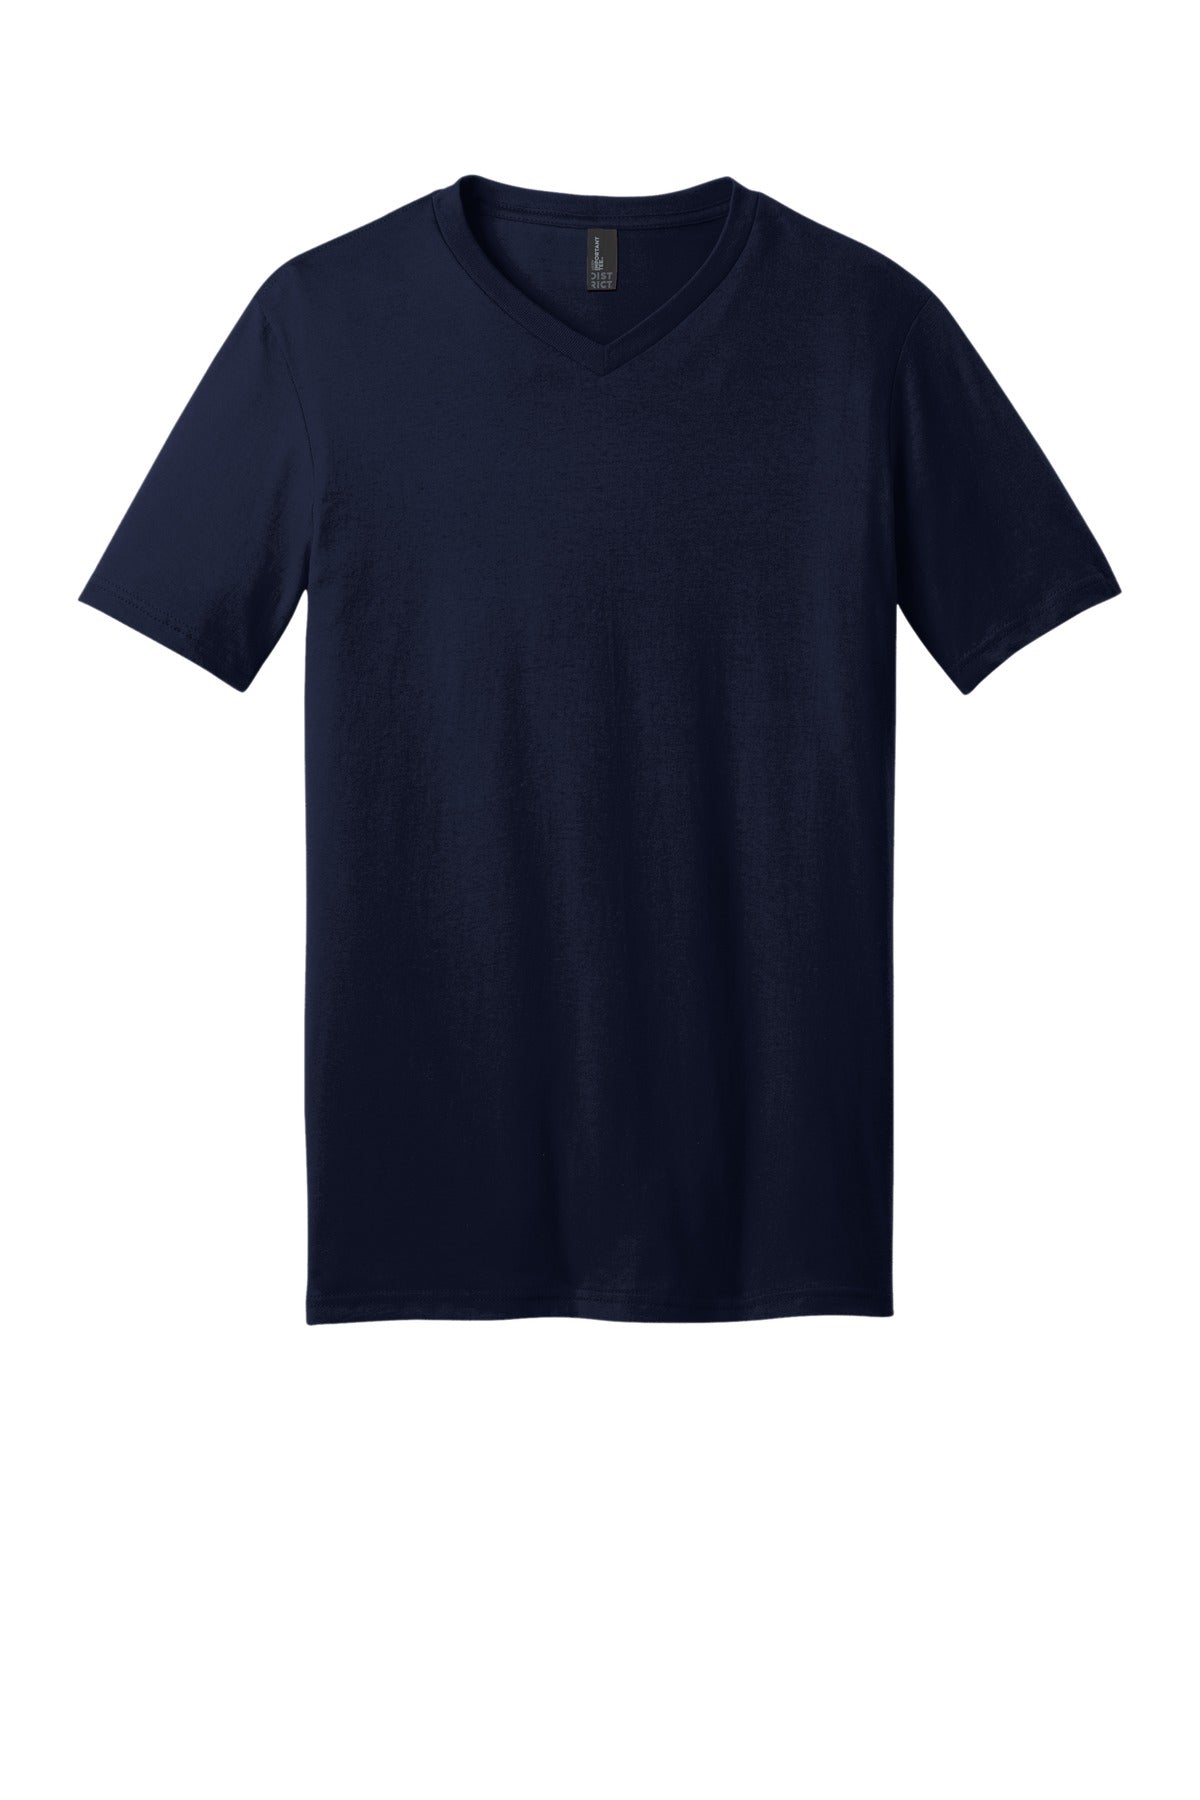 District Very Important Tee V-Neck. DT6500